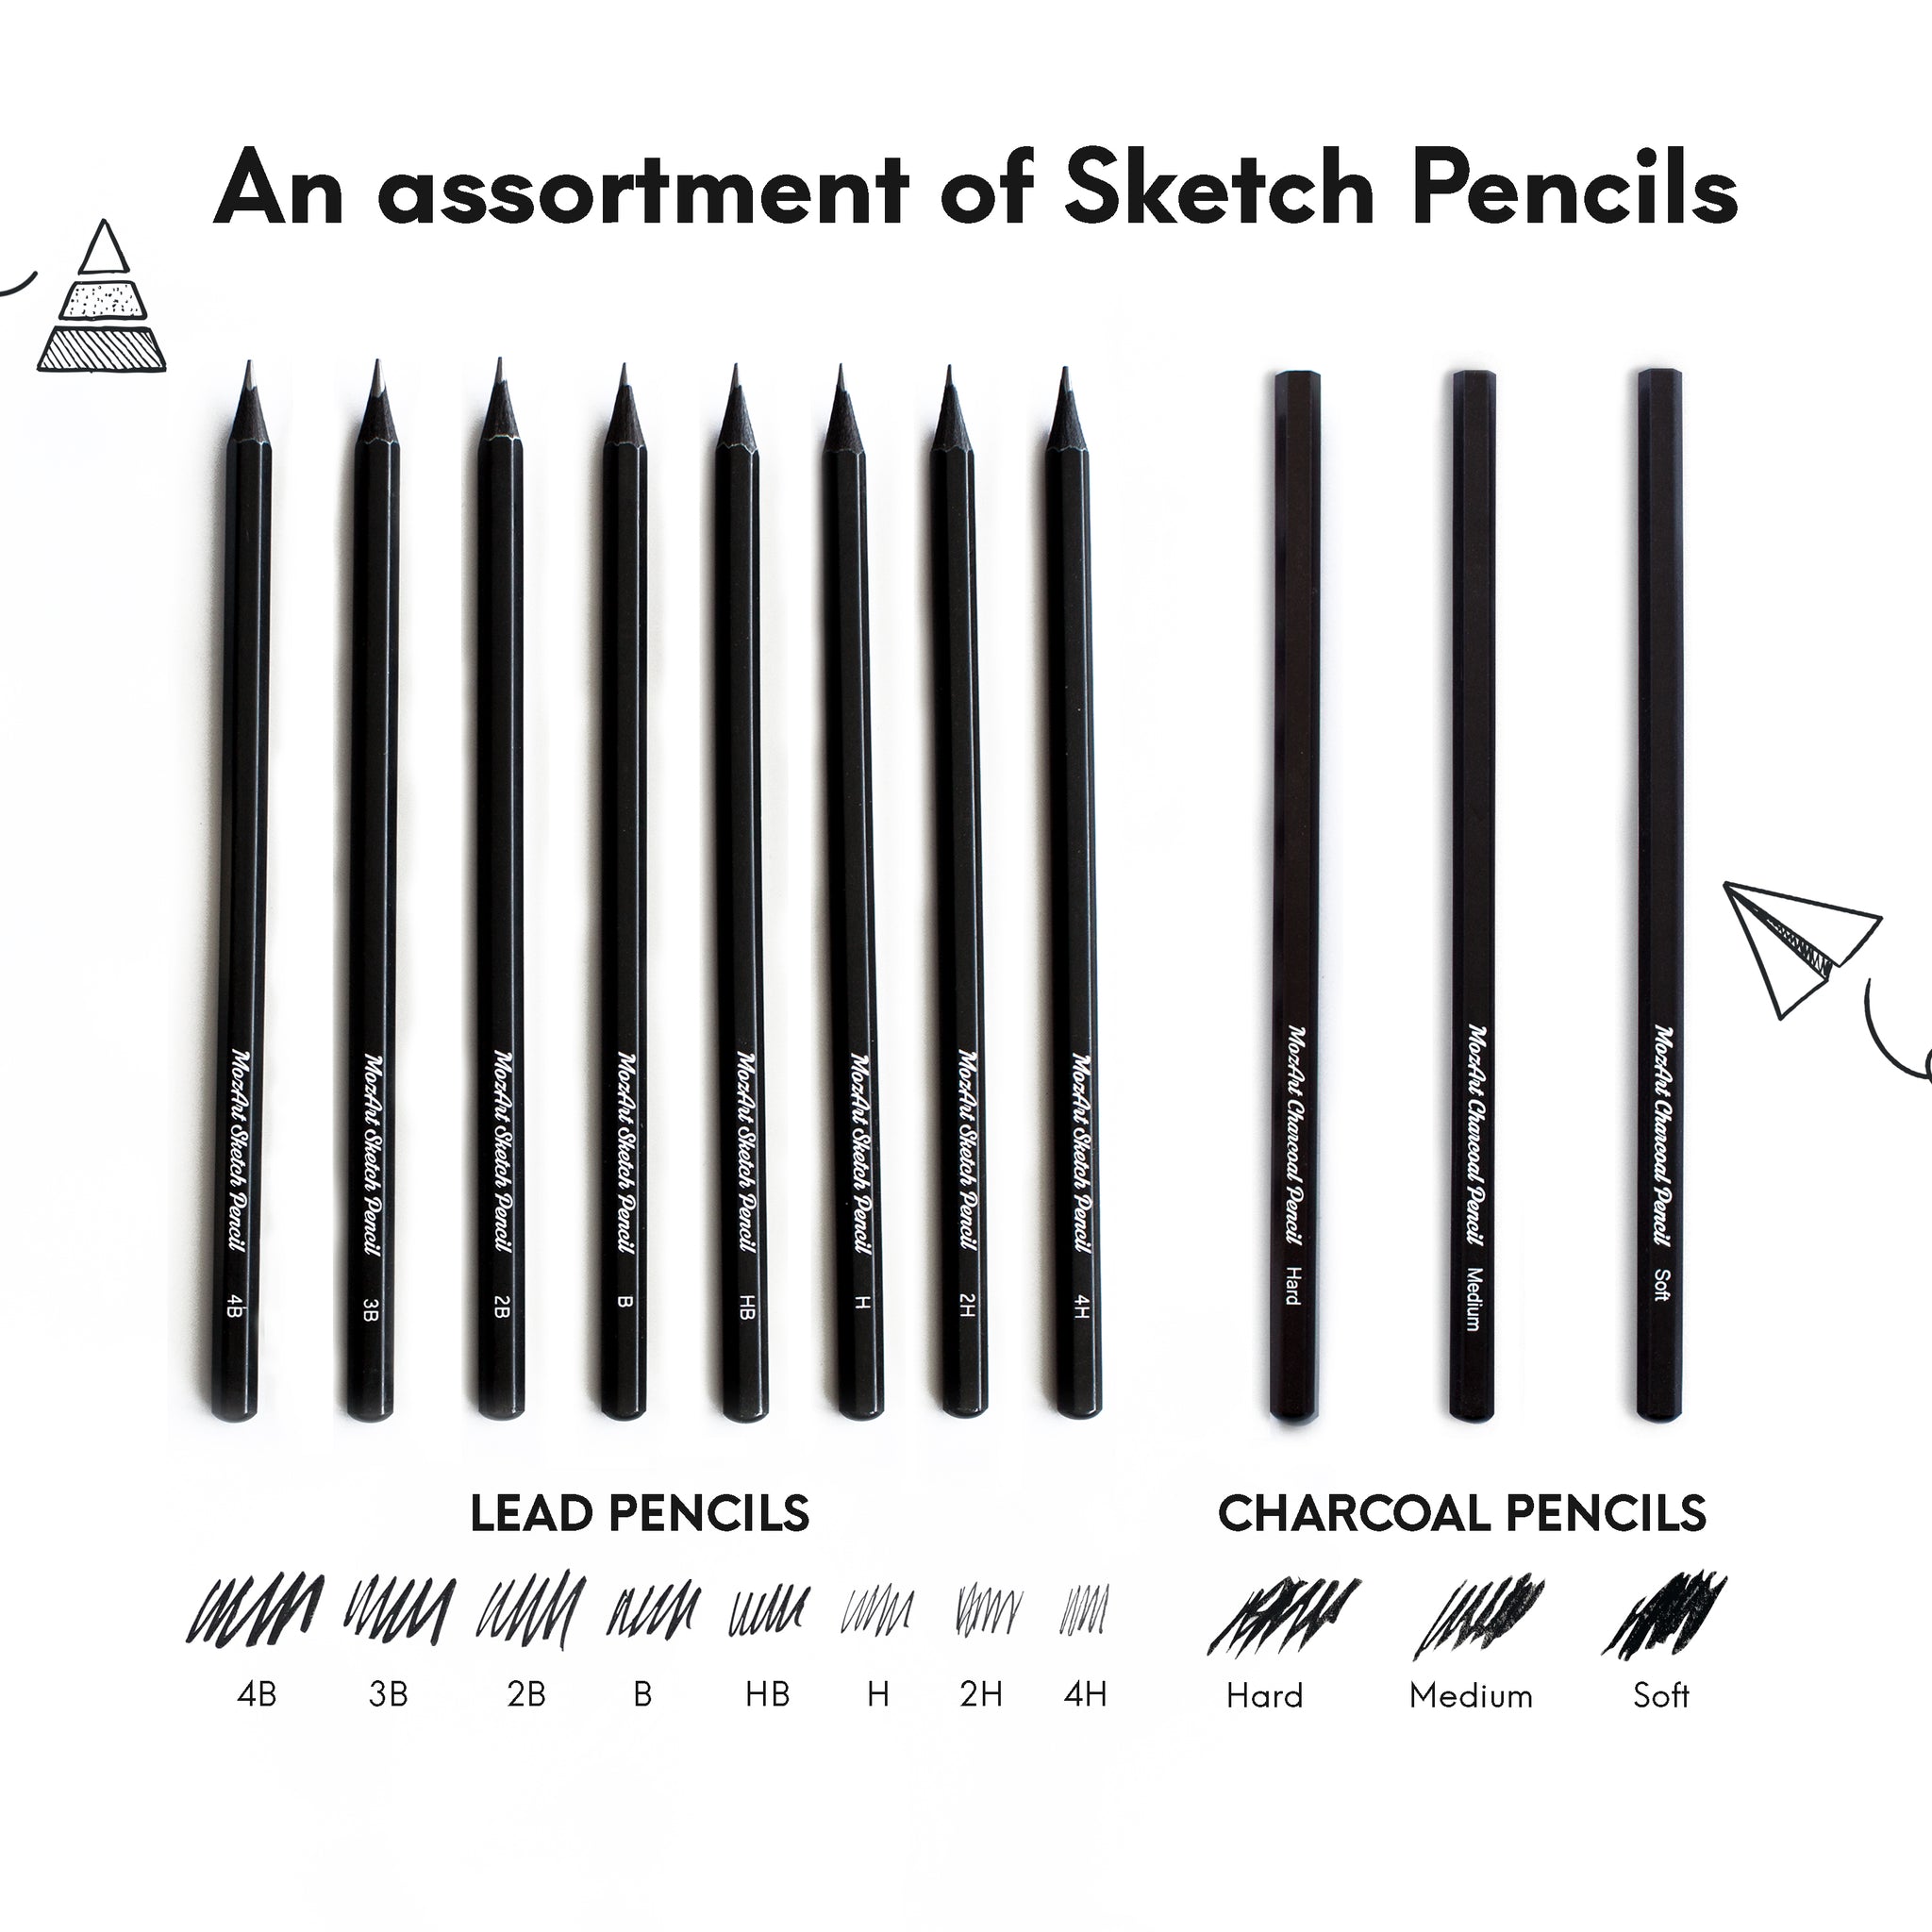 Prina 50 Pack Drawing Set Sketch Kit, Sketching Supplies with 3-Color Sketchbook, Graphite, and Charcoal Pencils, Pro Art Drawing Kit for Artists